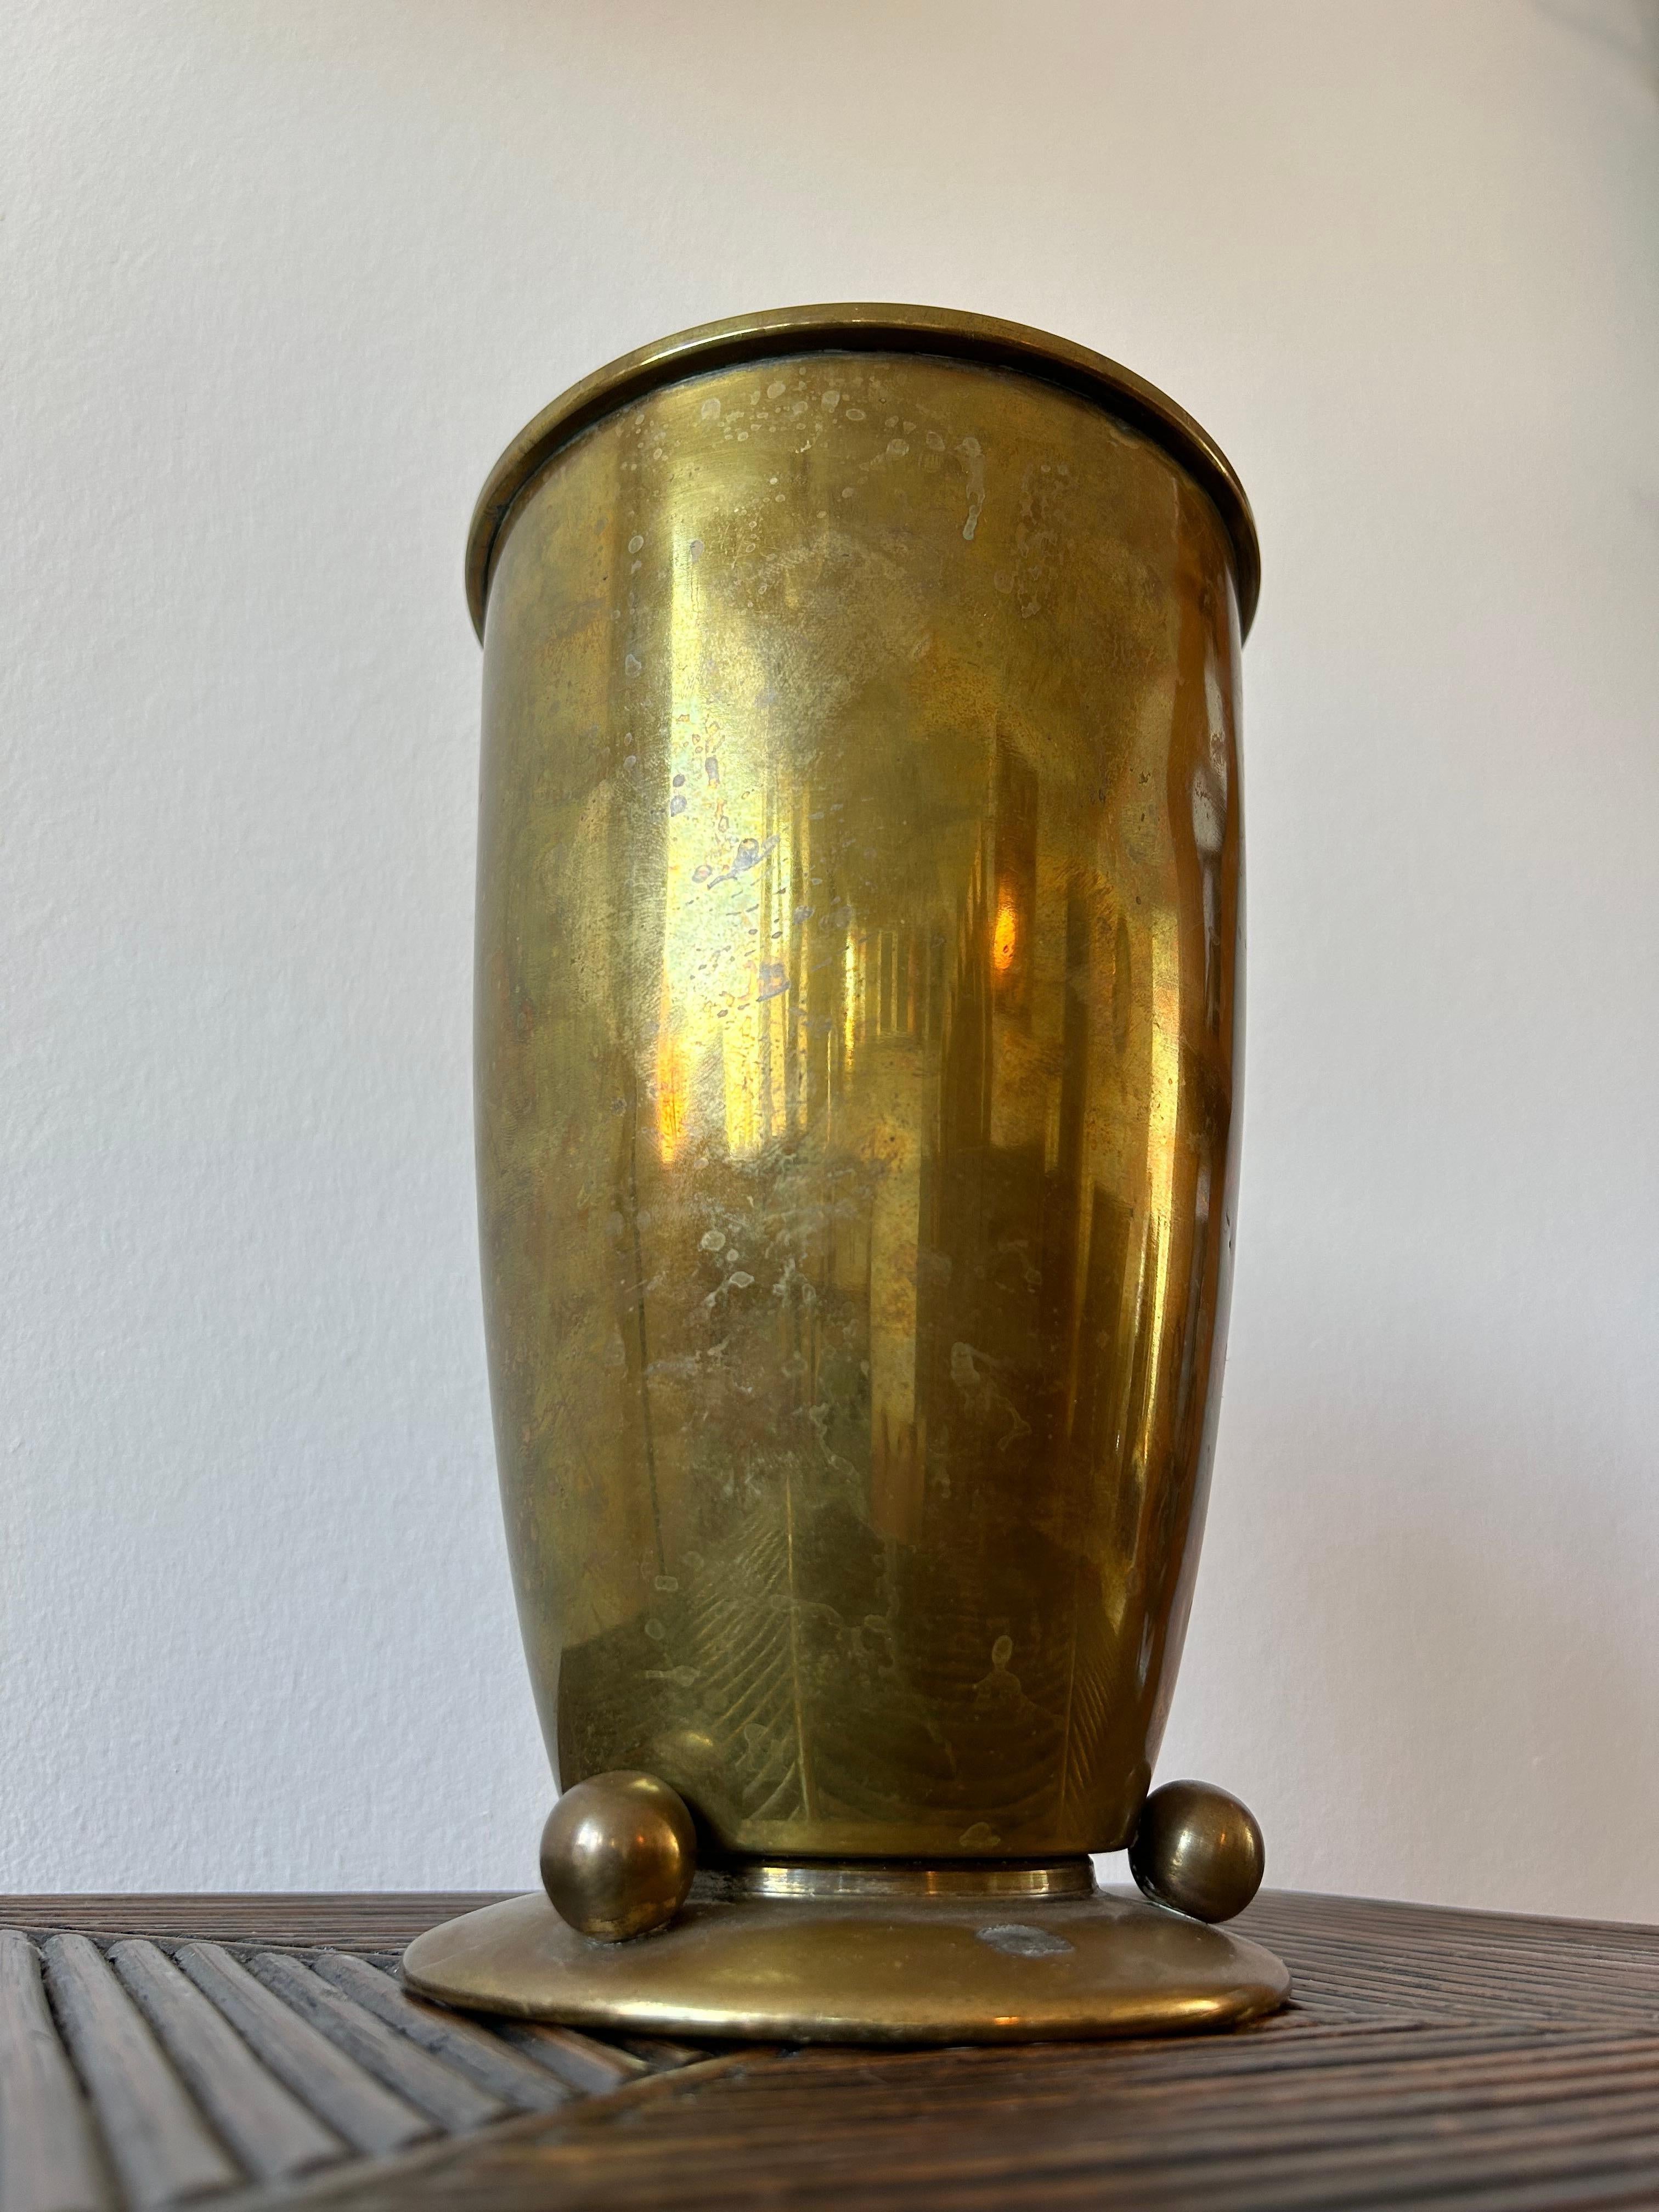 Rare and important Danish art deco vase made by Danish manufacturer Nordisk Malm in Denmark in the 1930’s.

The vase is very typical of the art deco period especially with the three decorative balls that the vase has on the base.

Nordisk Malm